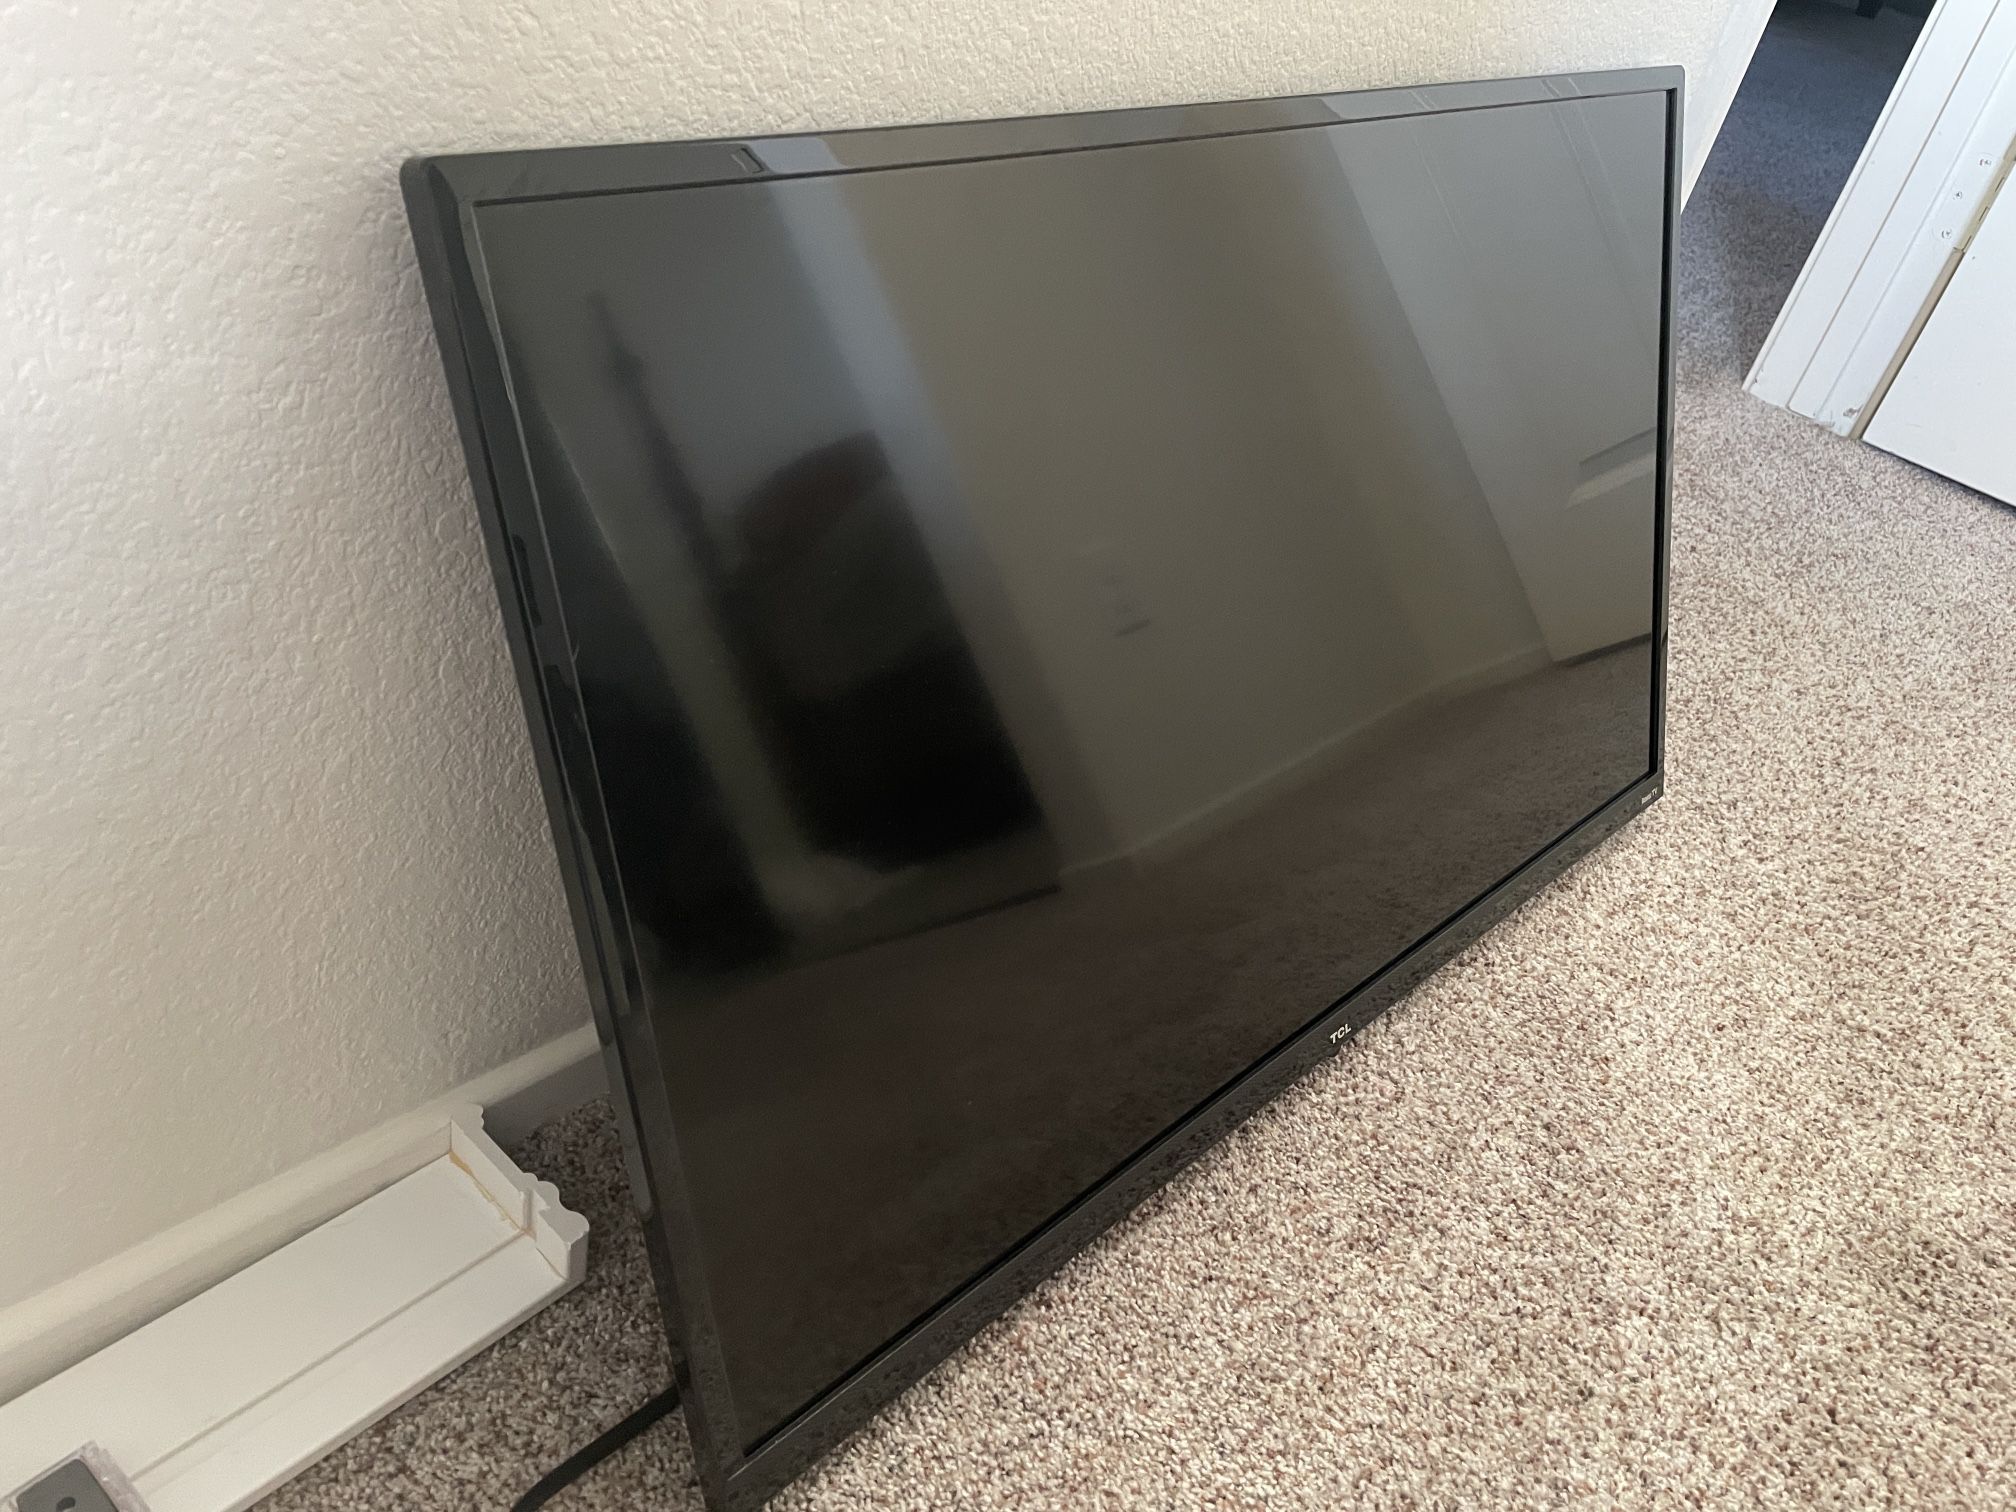 32” TCL Roku LCD TV - Model 32S335 - Excellent Condition